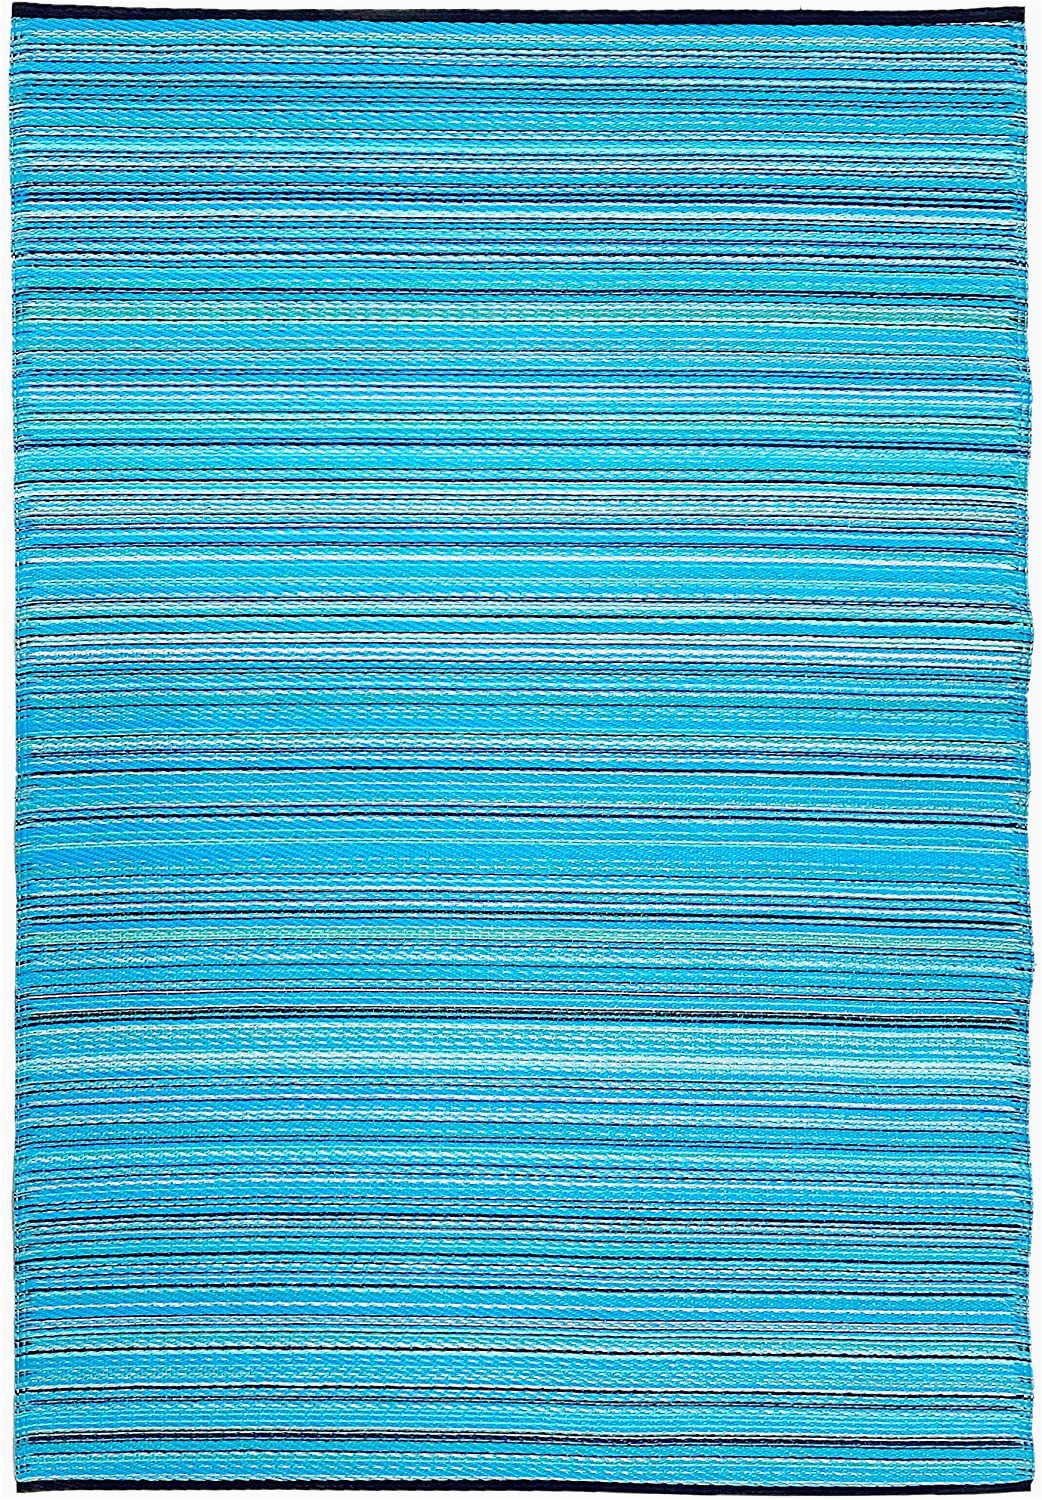 Blue Outdoor Rugs On Sale Green Decore Weaver Premium Grade Stain Proof Reversible Plastic Outdoor Rug 8×10 Turquoise Blue